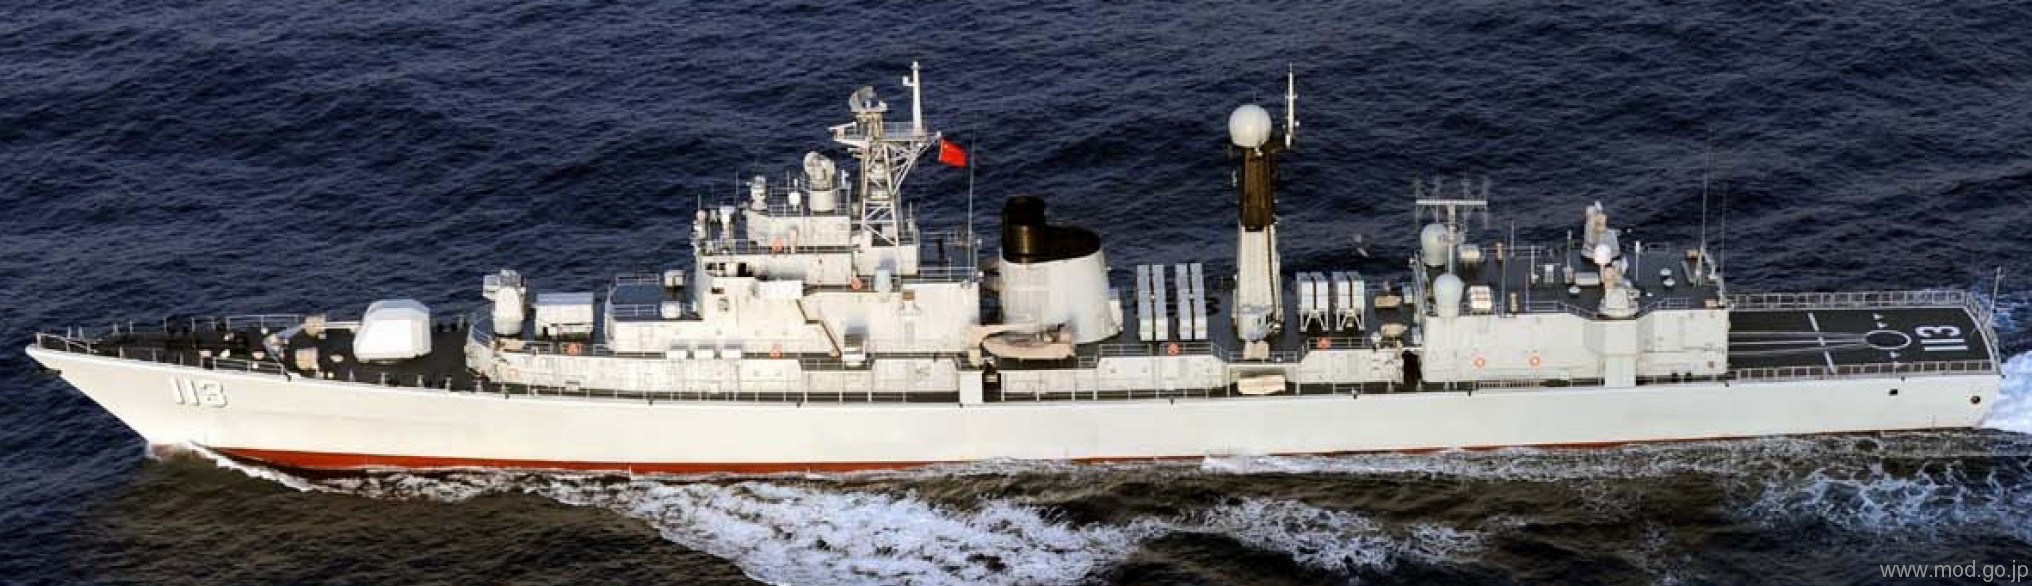 ddg-113 plans qingdao type 052 luhu class guided missile destroyer china peoples liberation army navy plan 04